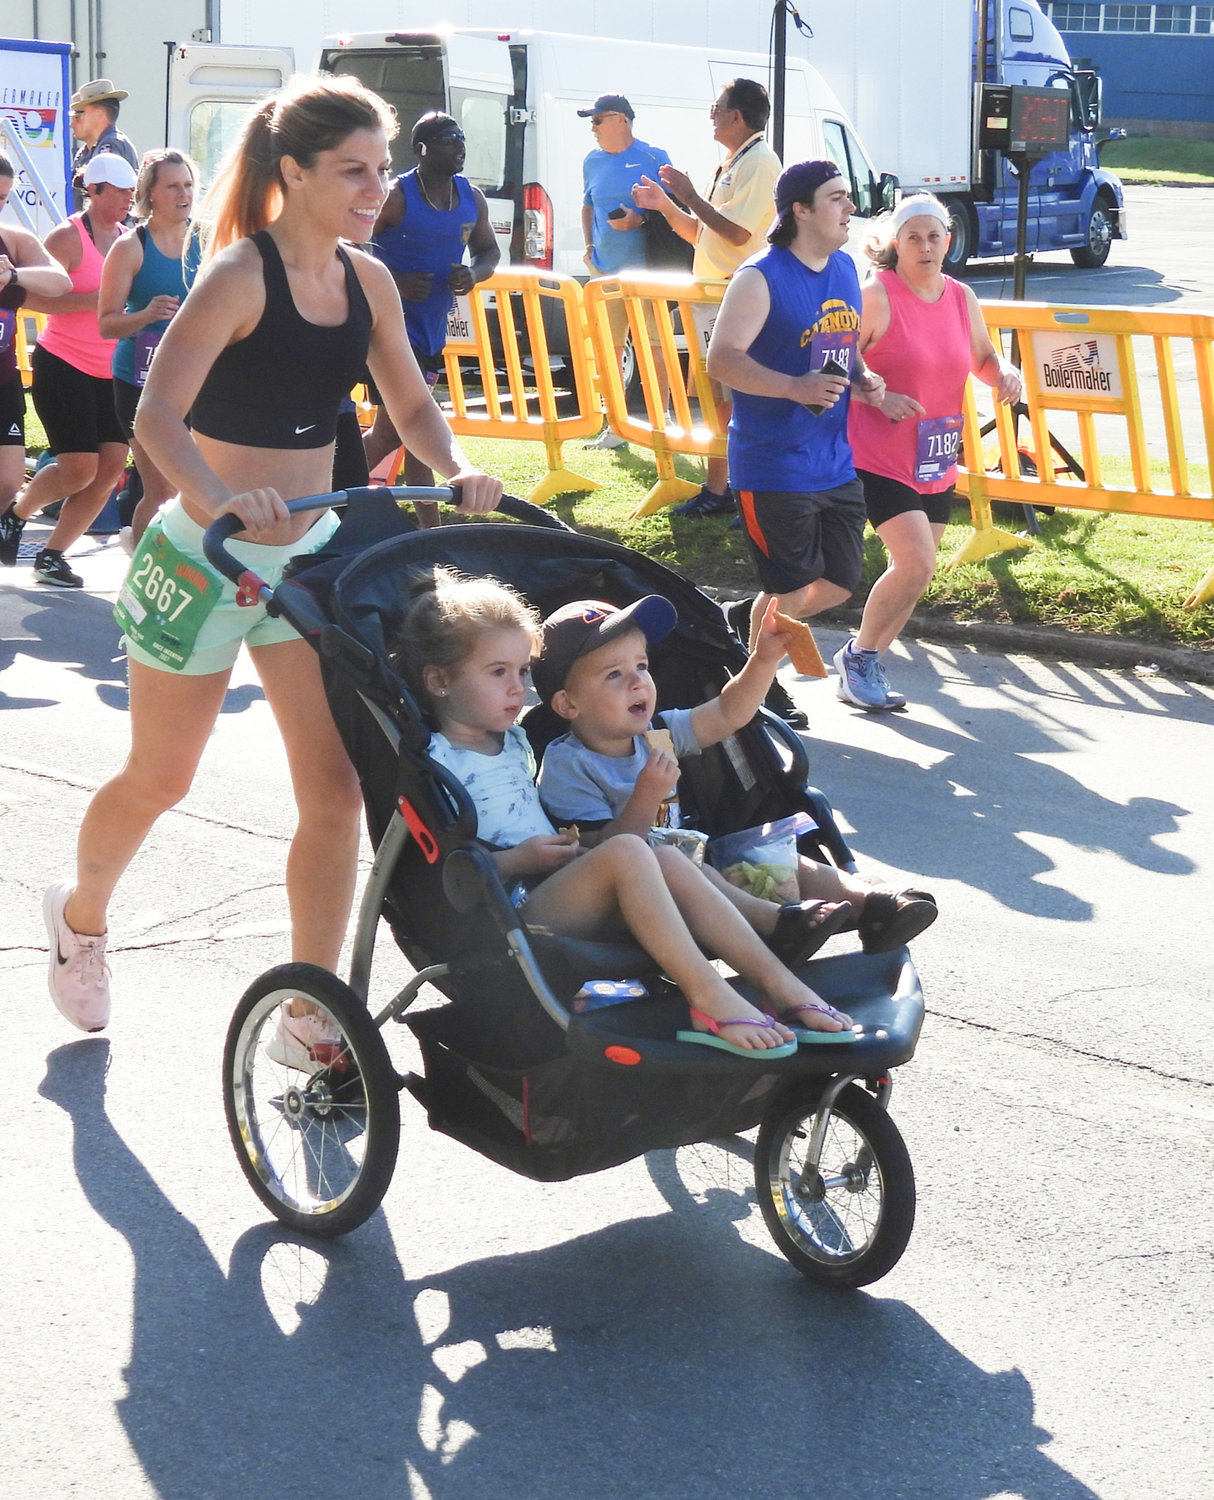 Some of the youngest participants in the 45th Boilermaker Road Race on Sunday, July 10 in Utica.